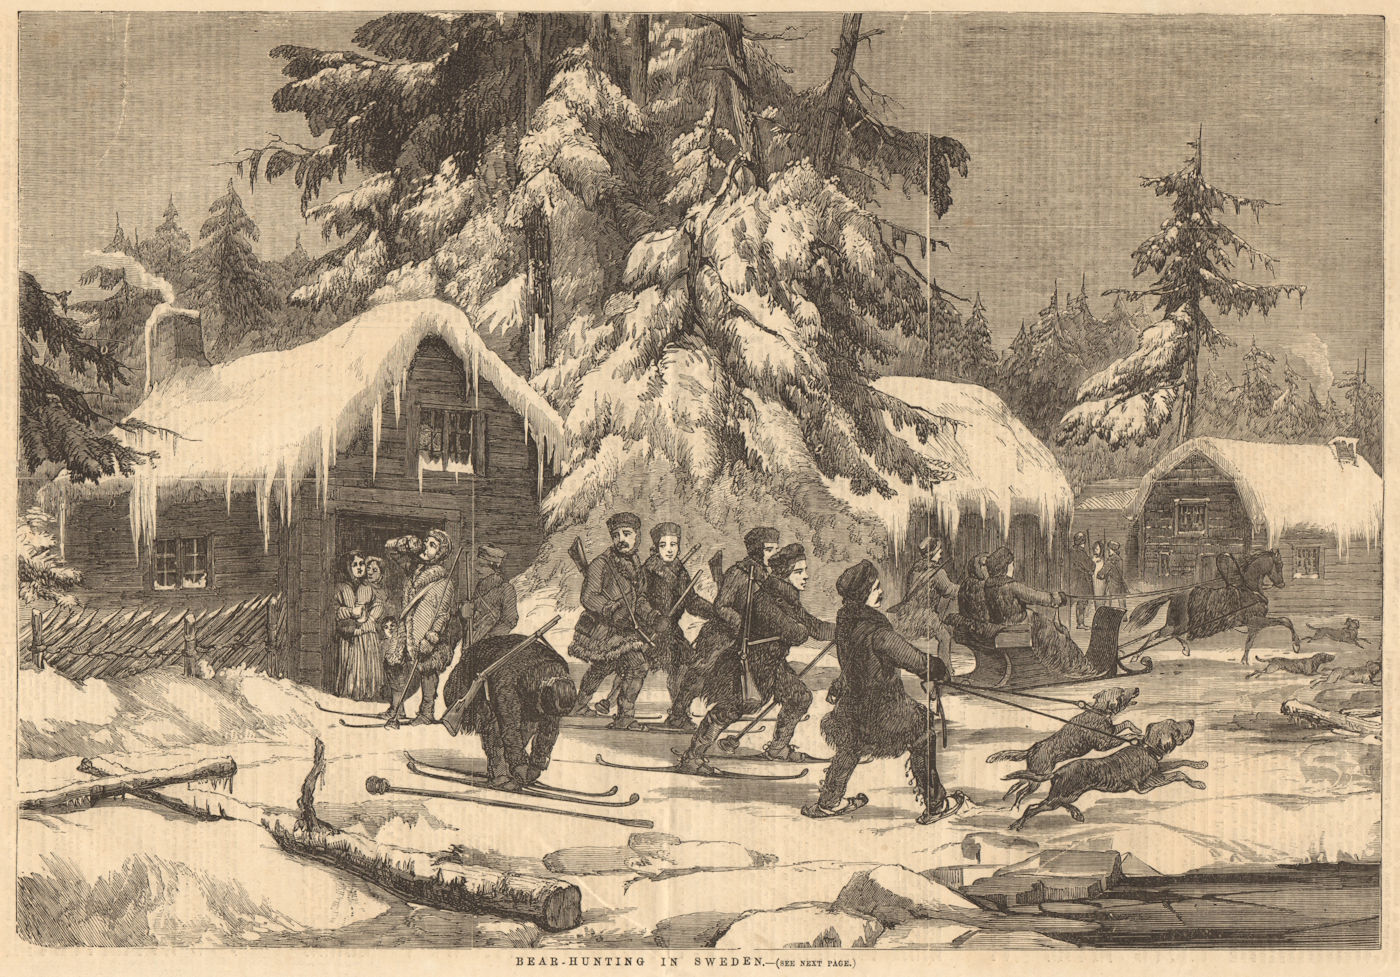 Associate Product Bear hunting in Sweden on skis with sledges & dogs. Skiing 1856 ILN full page